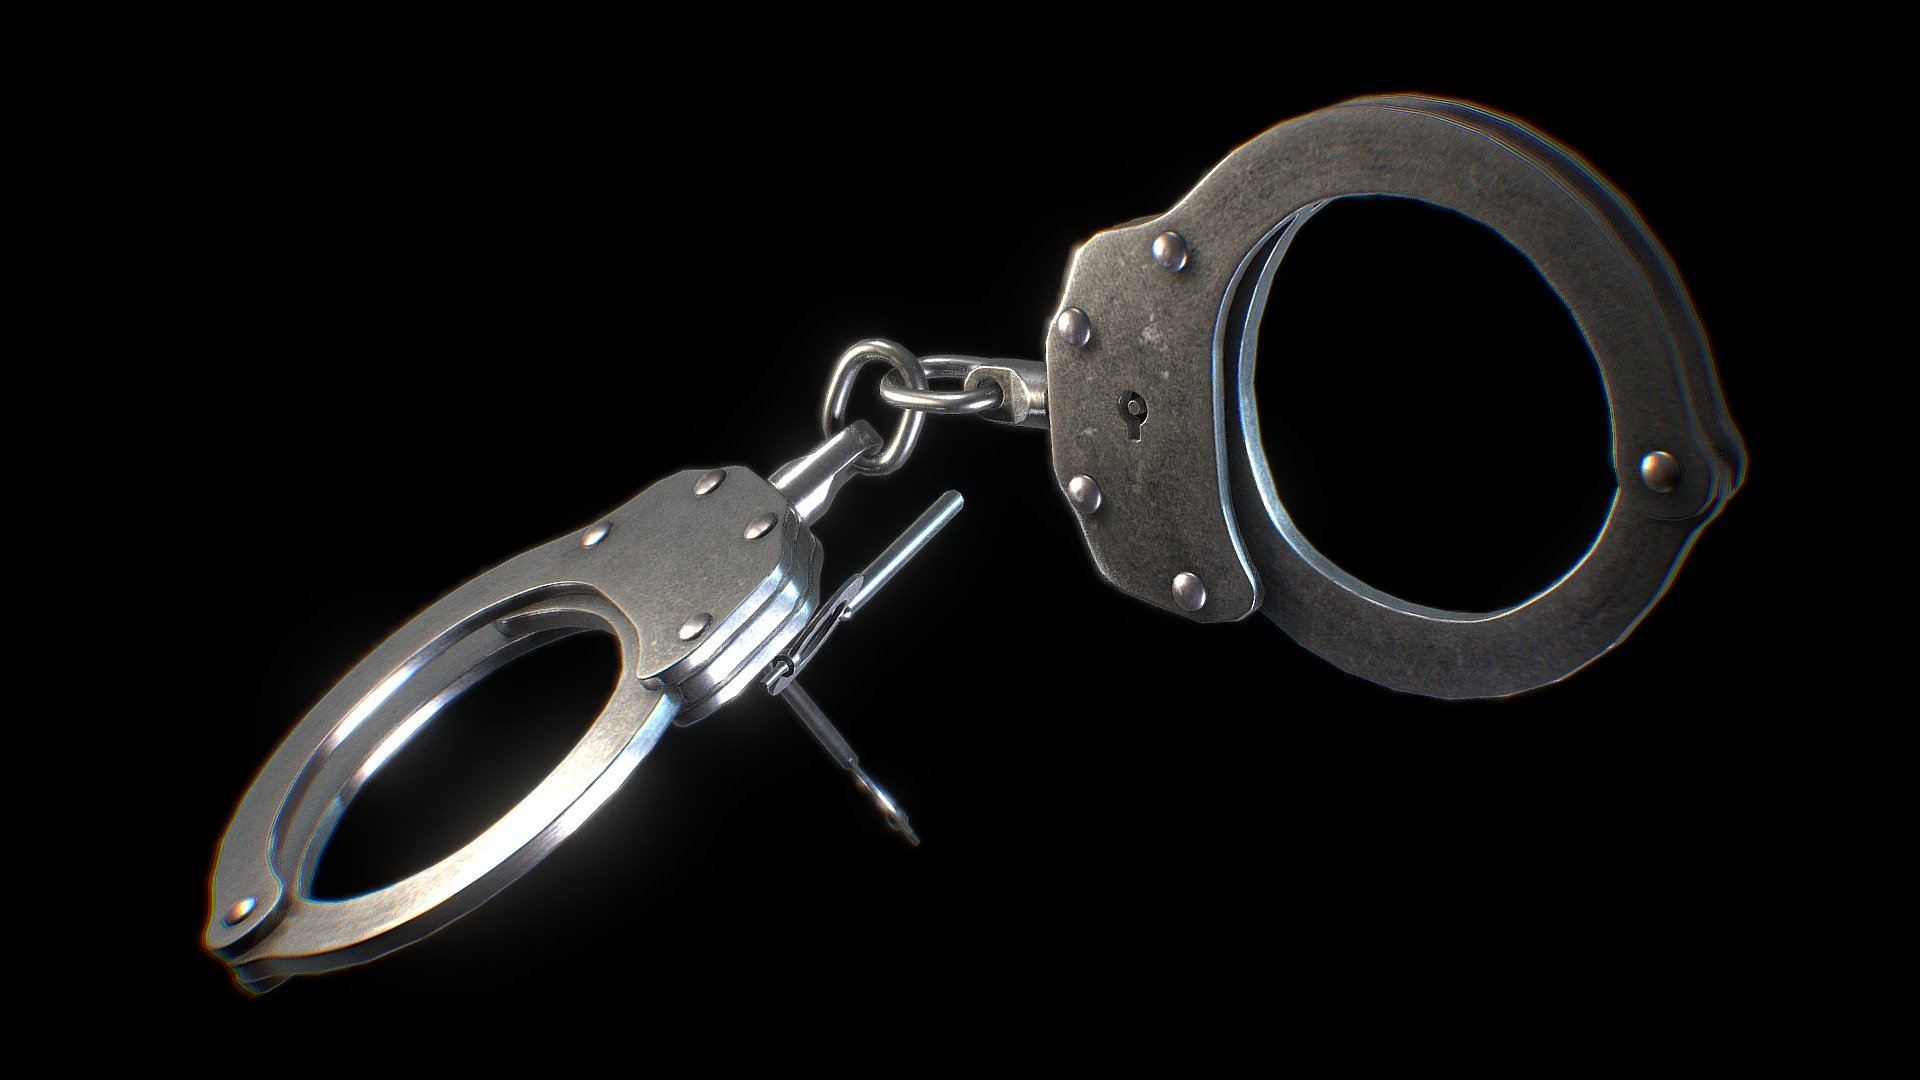 It is a 3d model of Handcuffs for using as tool for security purpose. It is can be used as a restraint devices by cops in games and many other render engines.

This model is created in 3ds Max and textured in Substance Painter.

This model is made in real proportions.

High quality of textures are available to download.

Metal-ness workflow- Base Color, Normal, Ambient Occlusion, Metallic and Roughness Textures 3d model